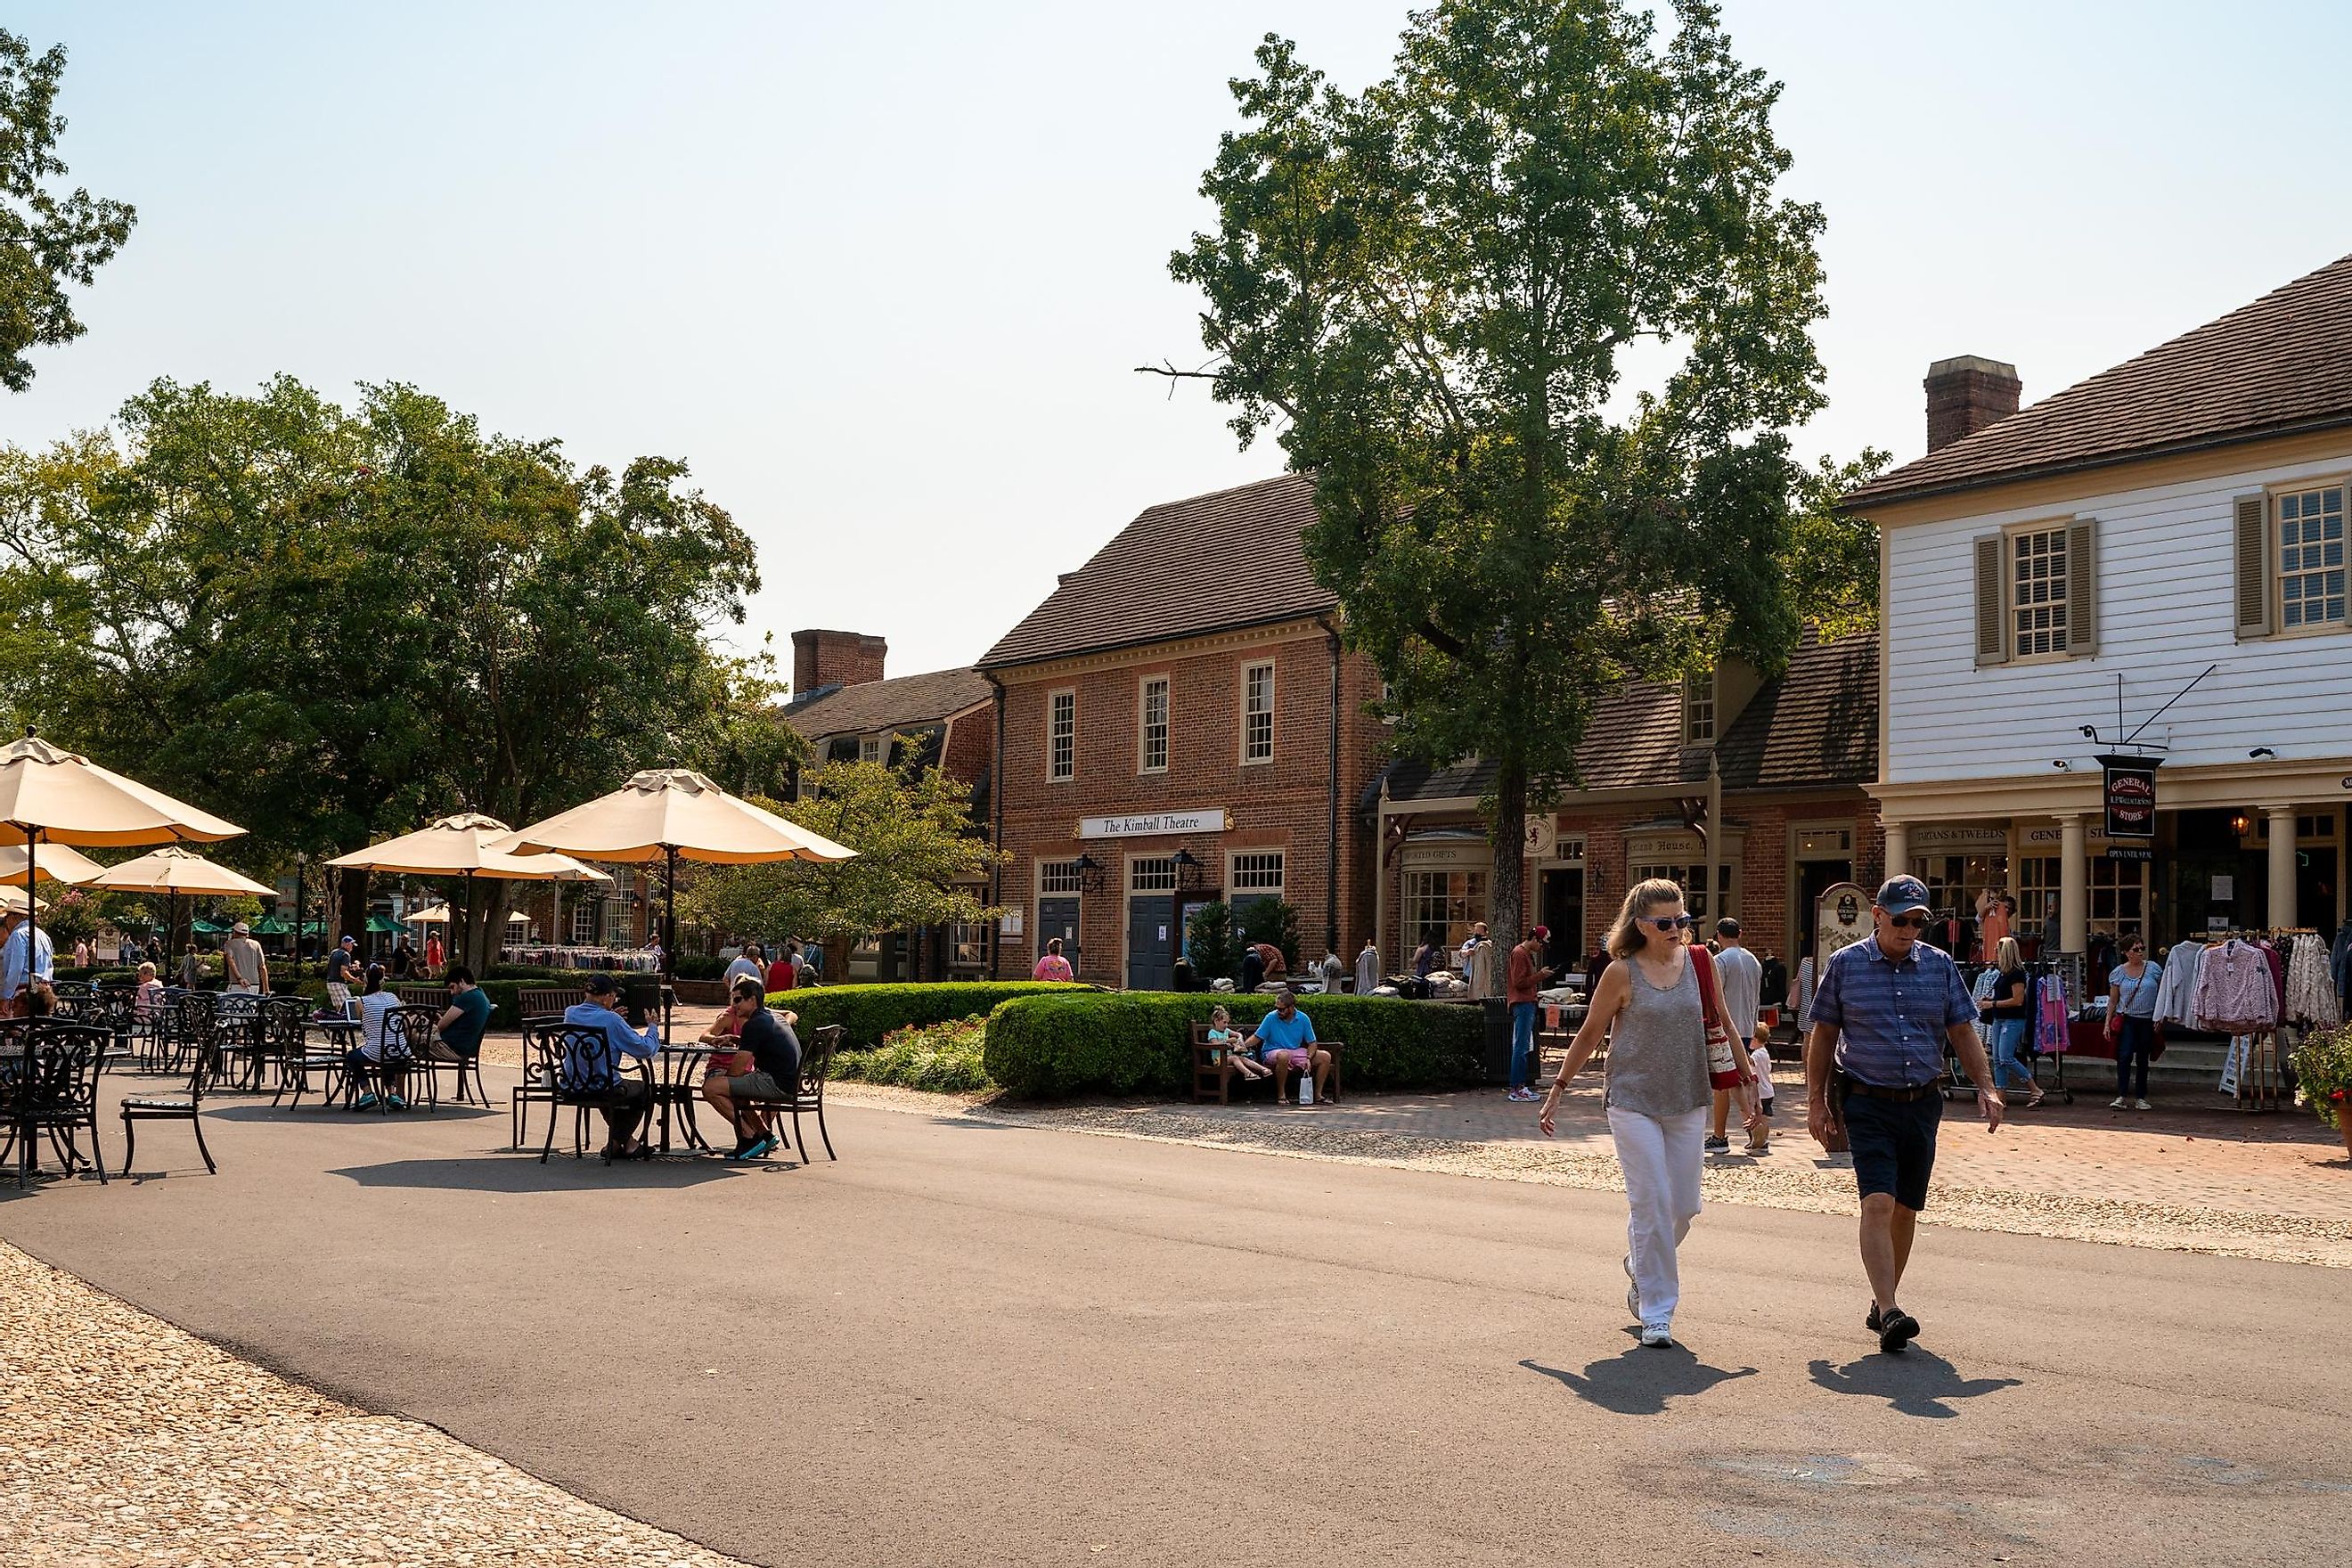 Street scene from historic Williamsburg Virginia at Merchants Square with people visible.